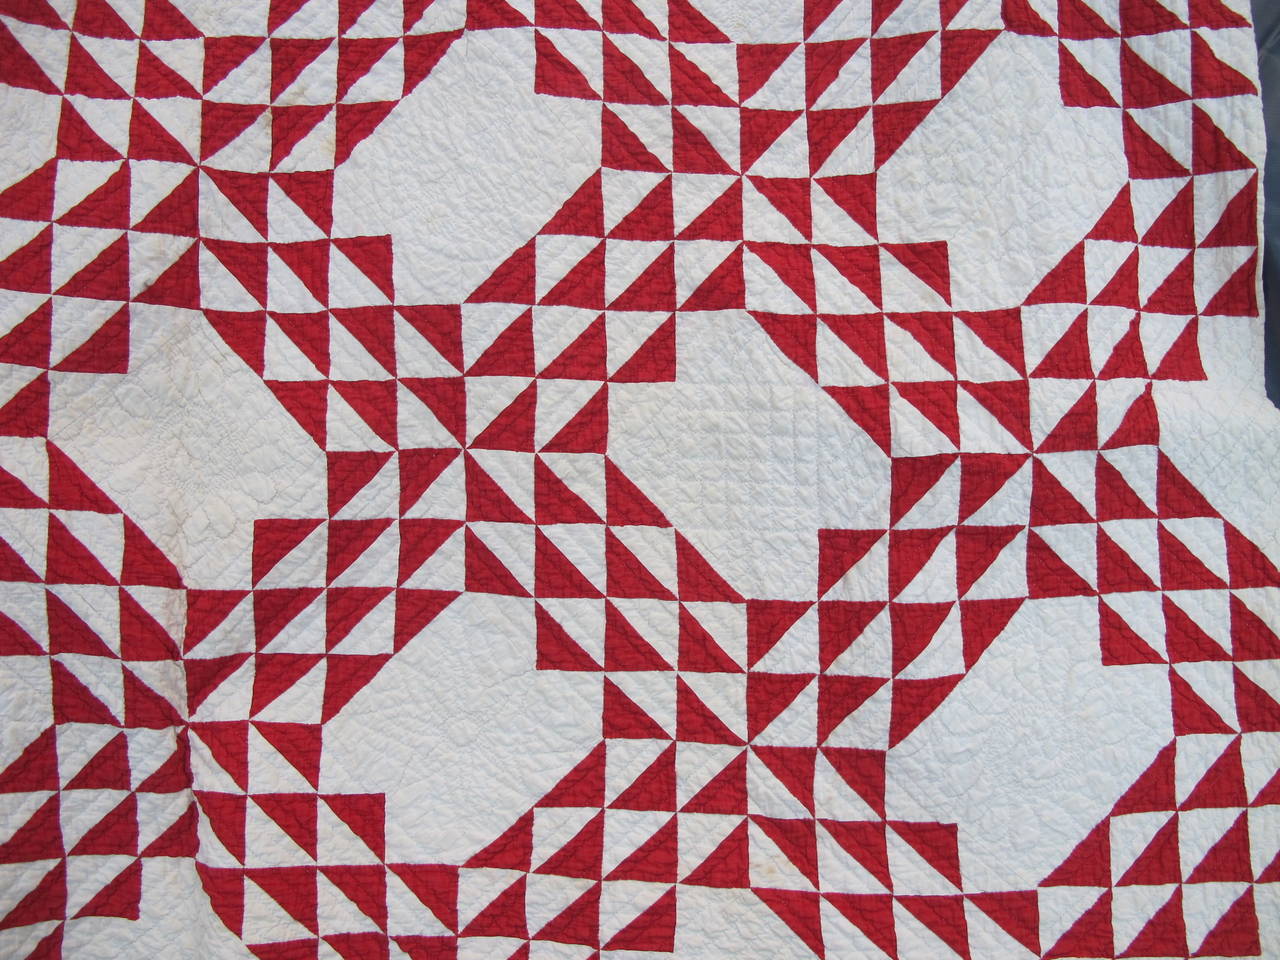 Exceptionally finely quilted early American quilt.